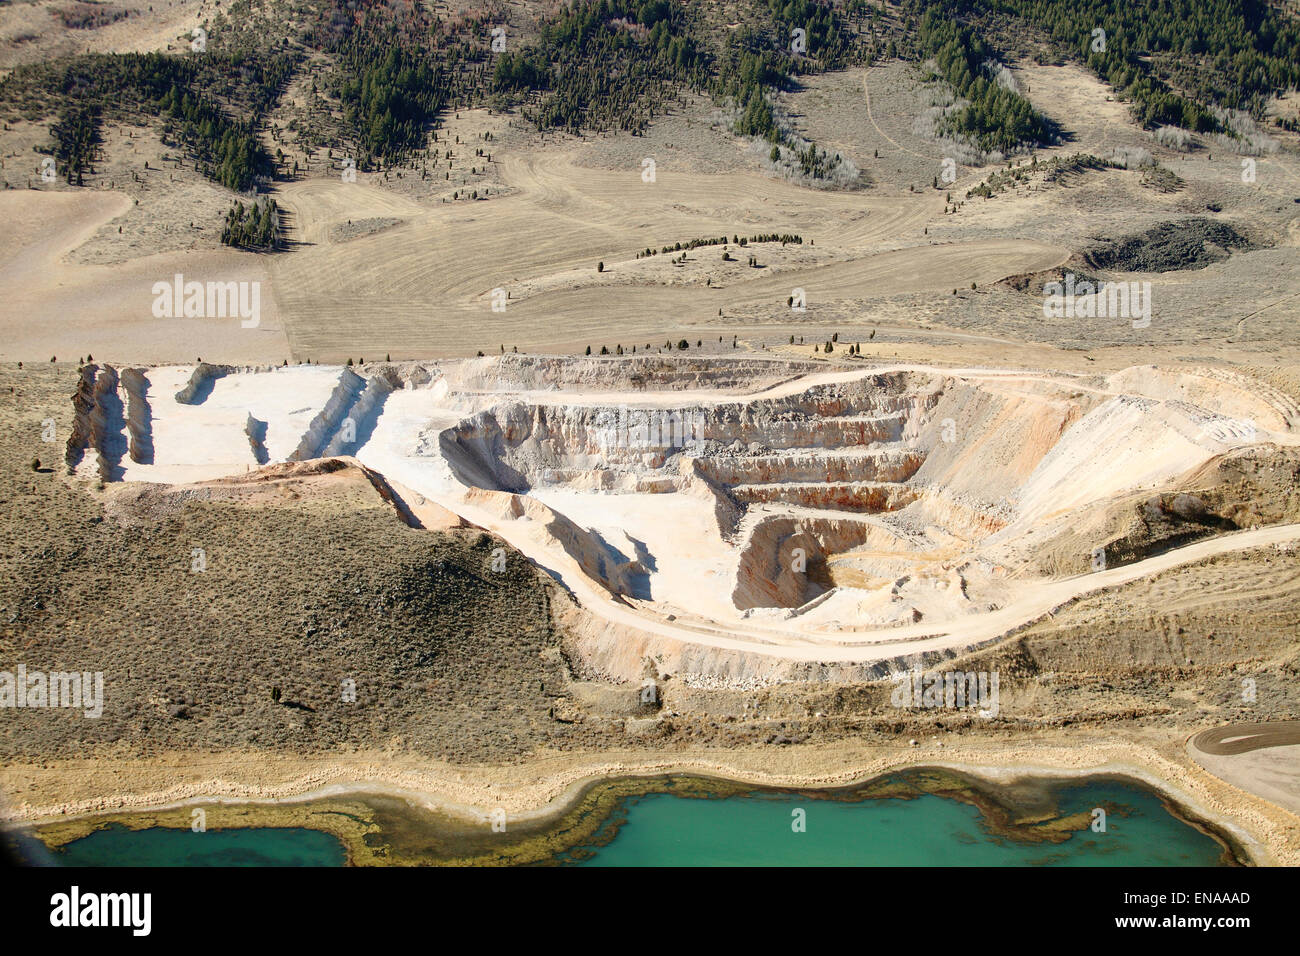 An aerial view of the tiers and levels of excavation in an open pit phosphate mine. Stock Photo